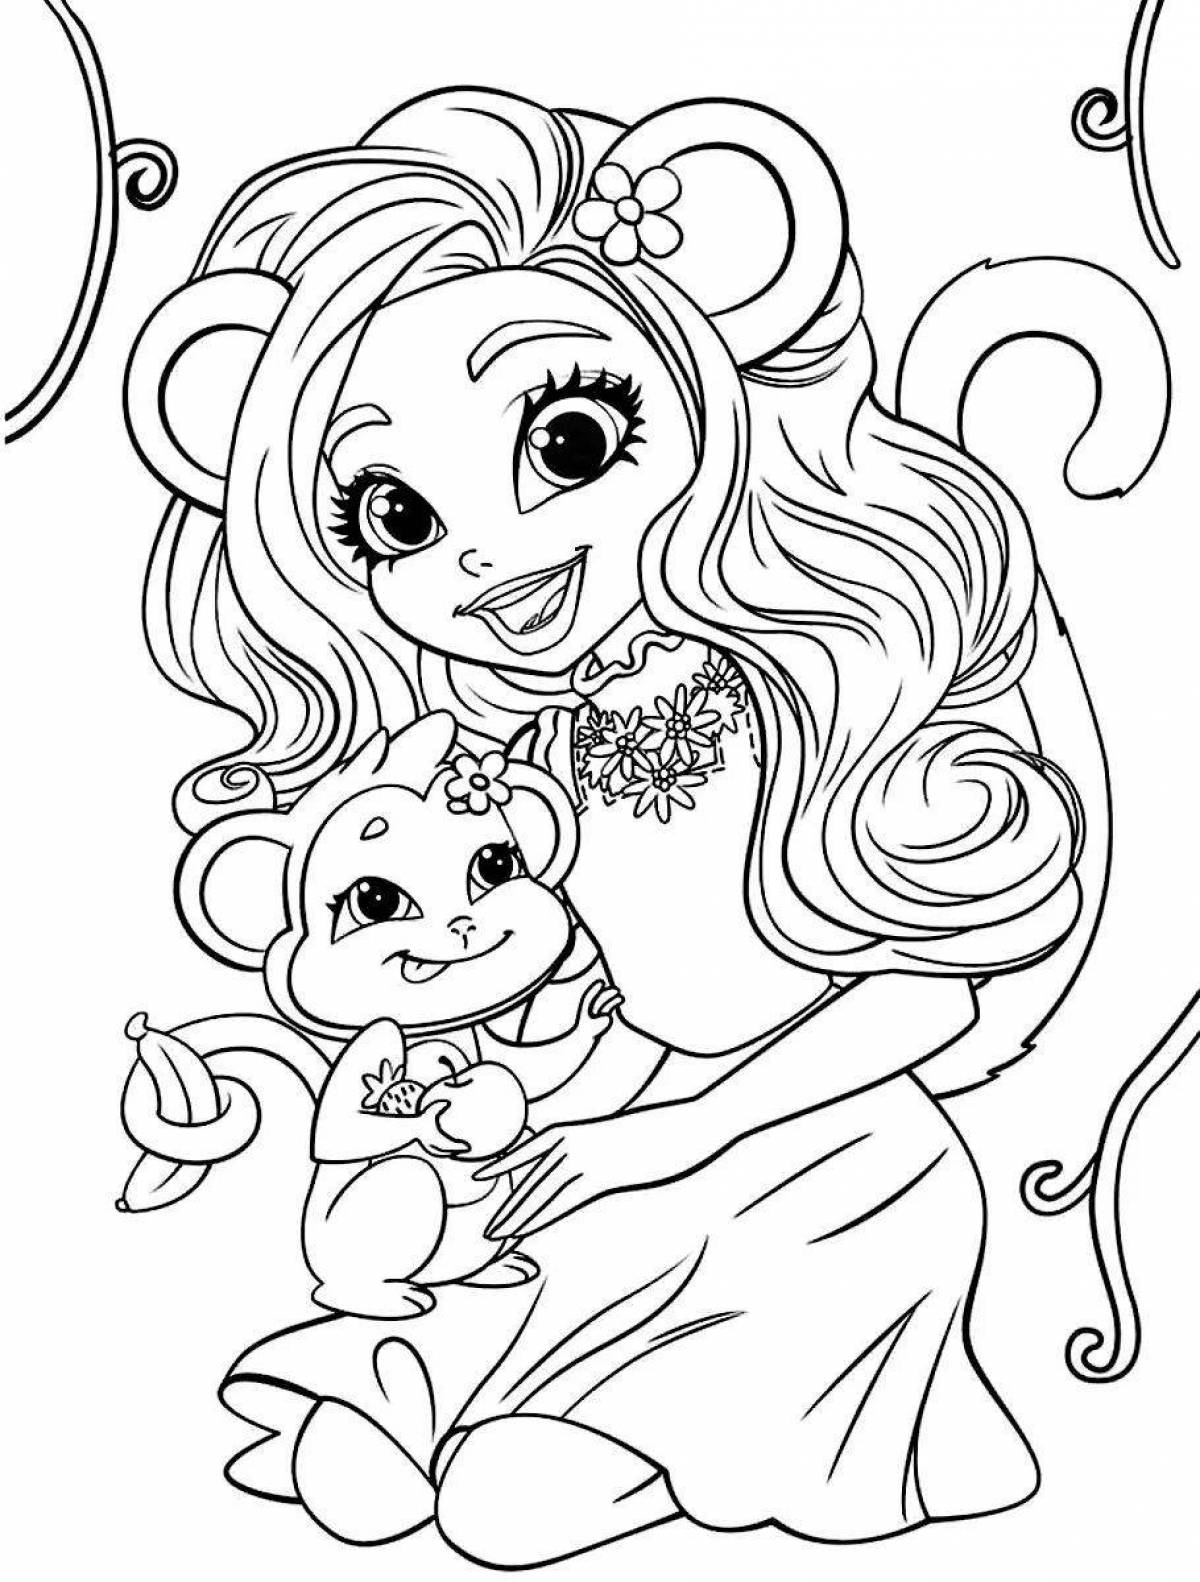 Adorable deer coloring page